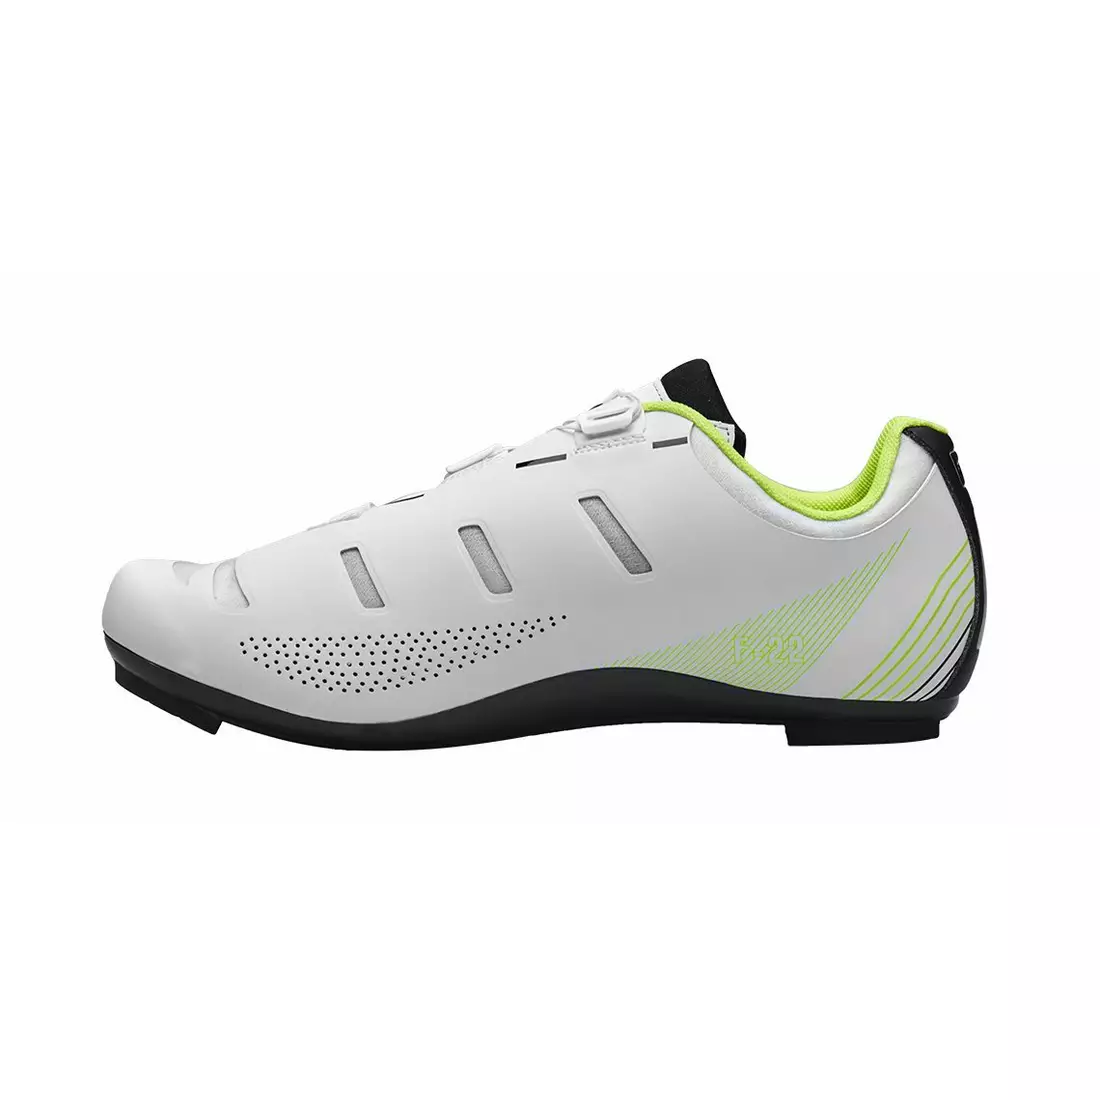 FLR F-22 road cycling shoes, white-fluor